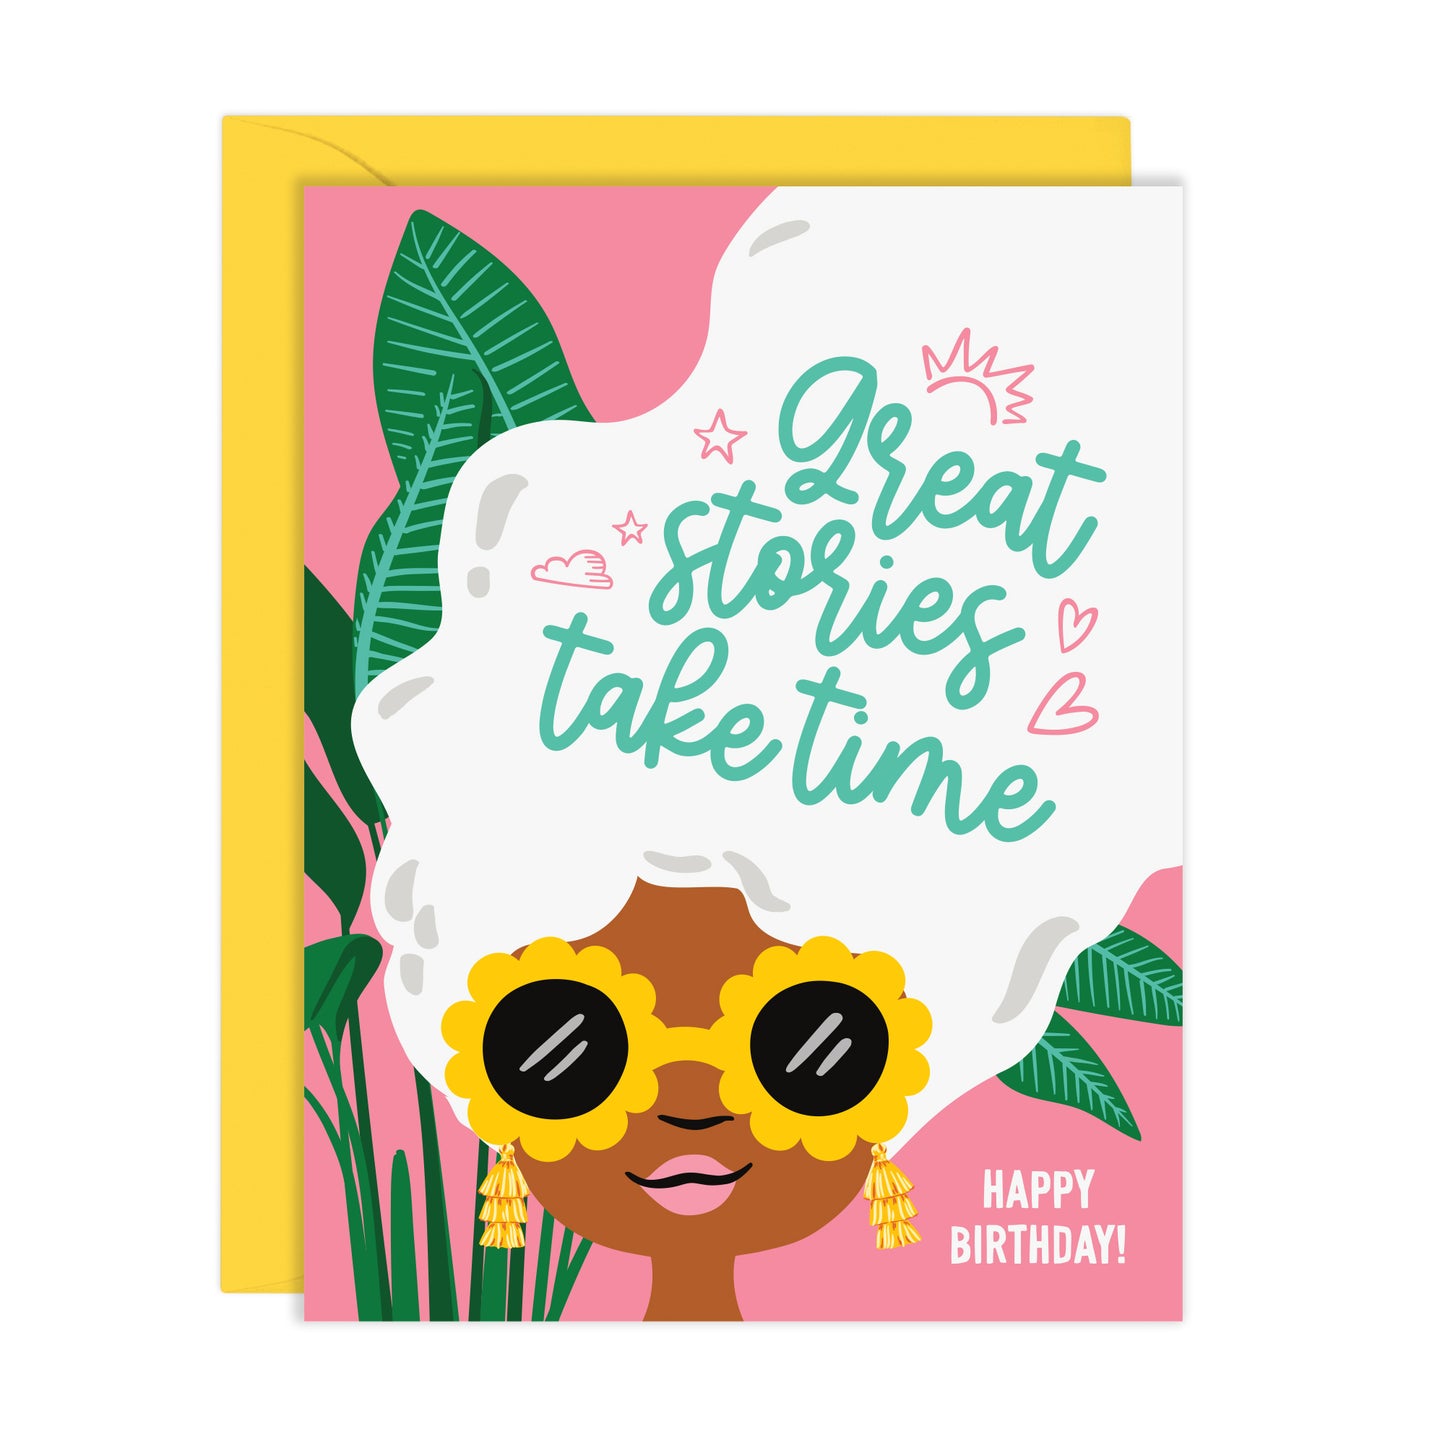 GREAT STORIES TAKE TIME - age-positive birthday card